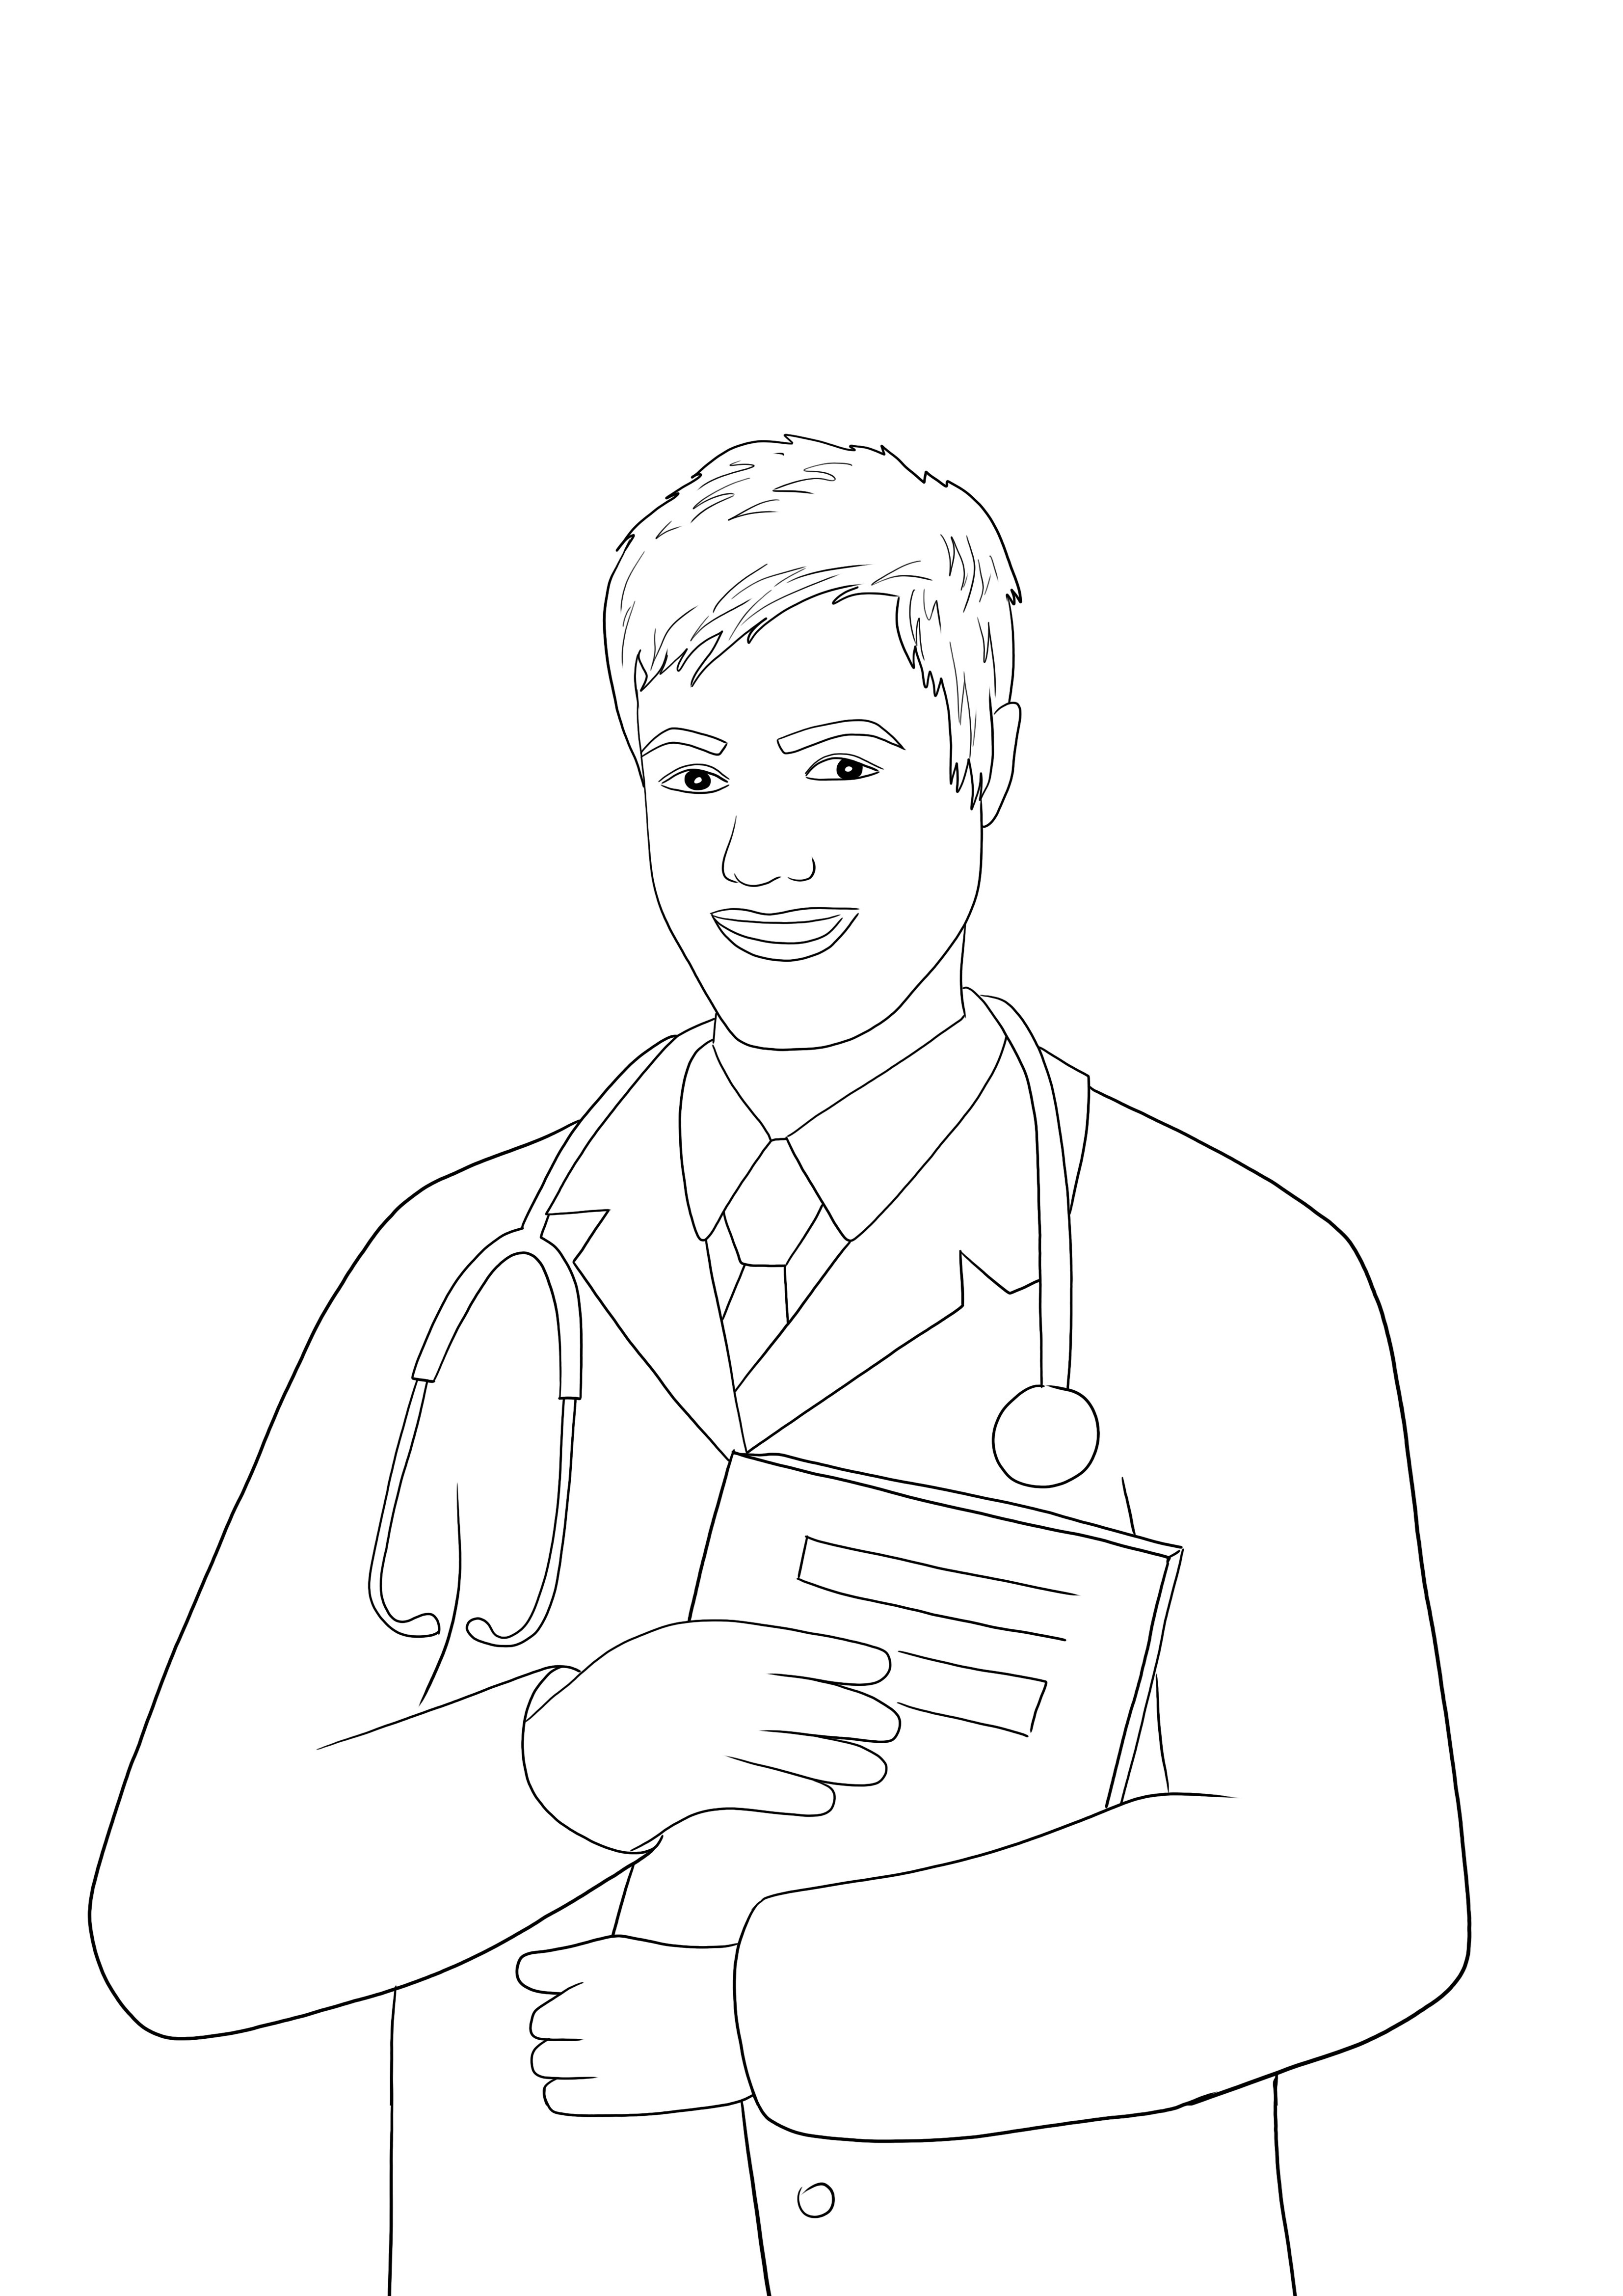 A free printable coloring image of a Man Doctor to teach about professions